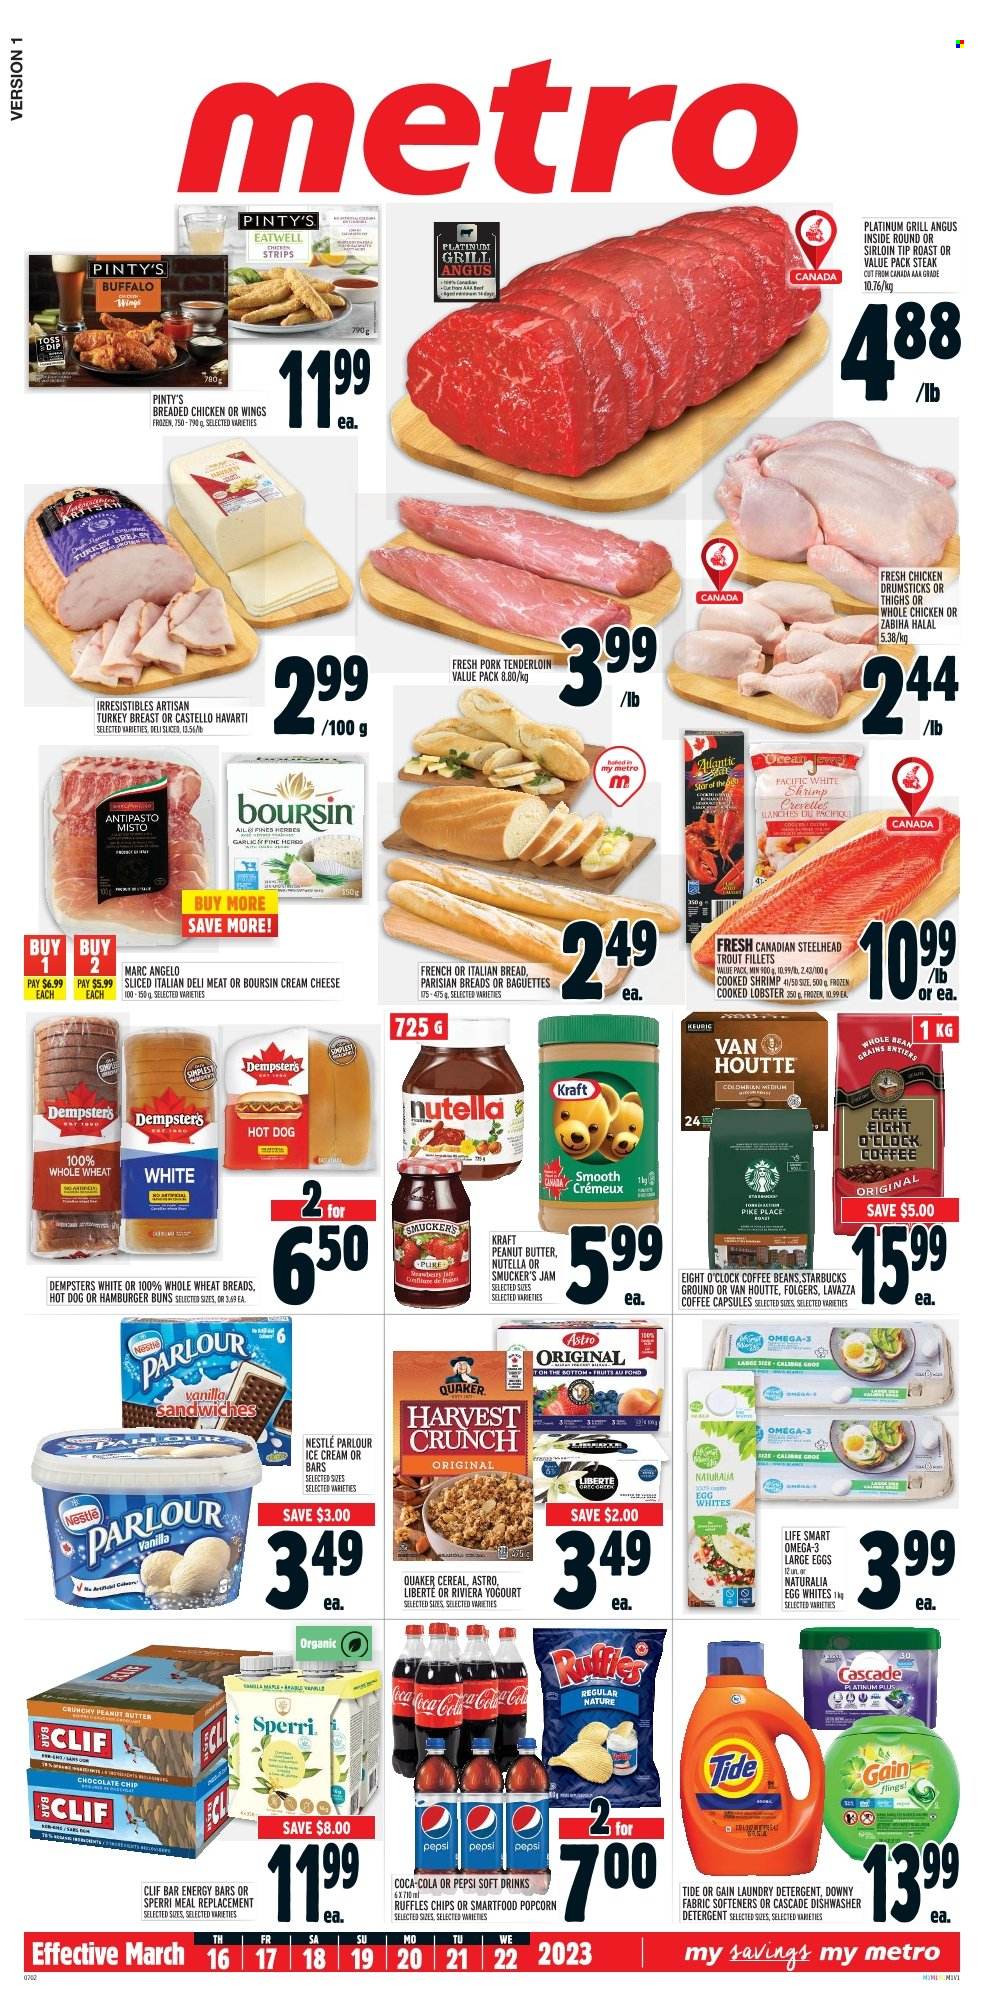 thumbnail - Metro Flyer - March 16, 2023 - March 22, 2023 - Sales products - buns, burger buns, lobster, trout, shrimps, hot dog, sandwich, fried chicken, Quaker, Kraft®, roast, cream cheese, Havarti, large eggs, ice cream, strips, chocolate chips, Smartfood, popcorn, Ruffles, cereals, energy bar, fruit jam, peanut butter, Coca-Cola, Pepsi, soft drink, coffee, coffee beans, Folgers, coffee capsules, Starbucks, Lavazza, Eight O'Clock, whole chicken, chicken drumsticks, chicken, turkey, steak, pork meat, pork tenderloin, Gain, Tide, laundry detergent, Cascade, Downy Laundry, grill, Omega-3, baguette, detergent, Nestlé, Nutella. Page 1.